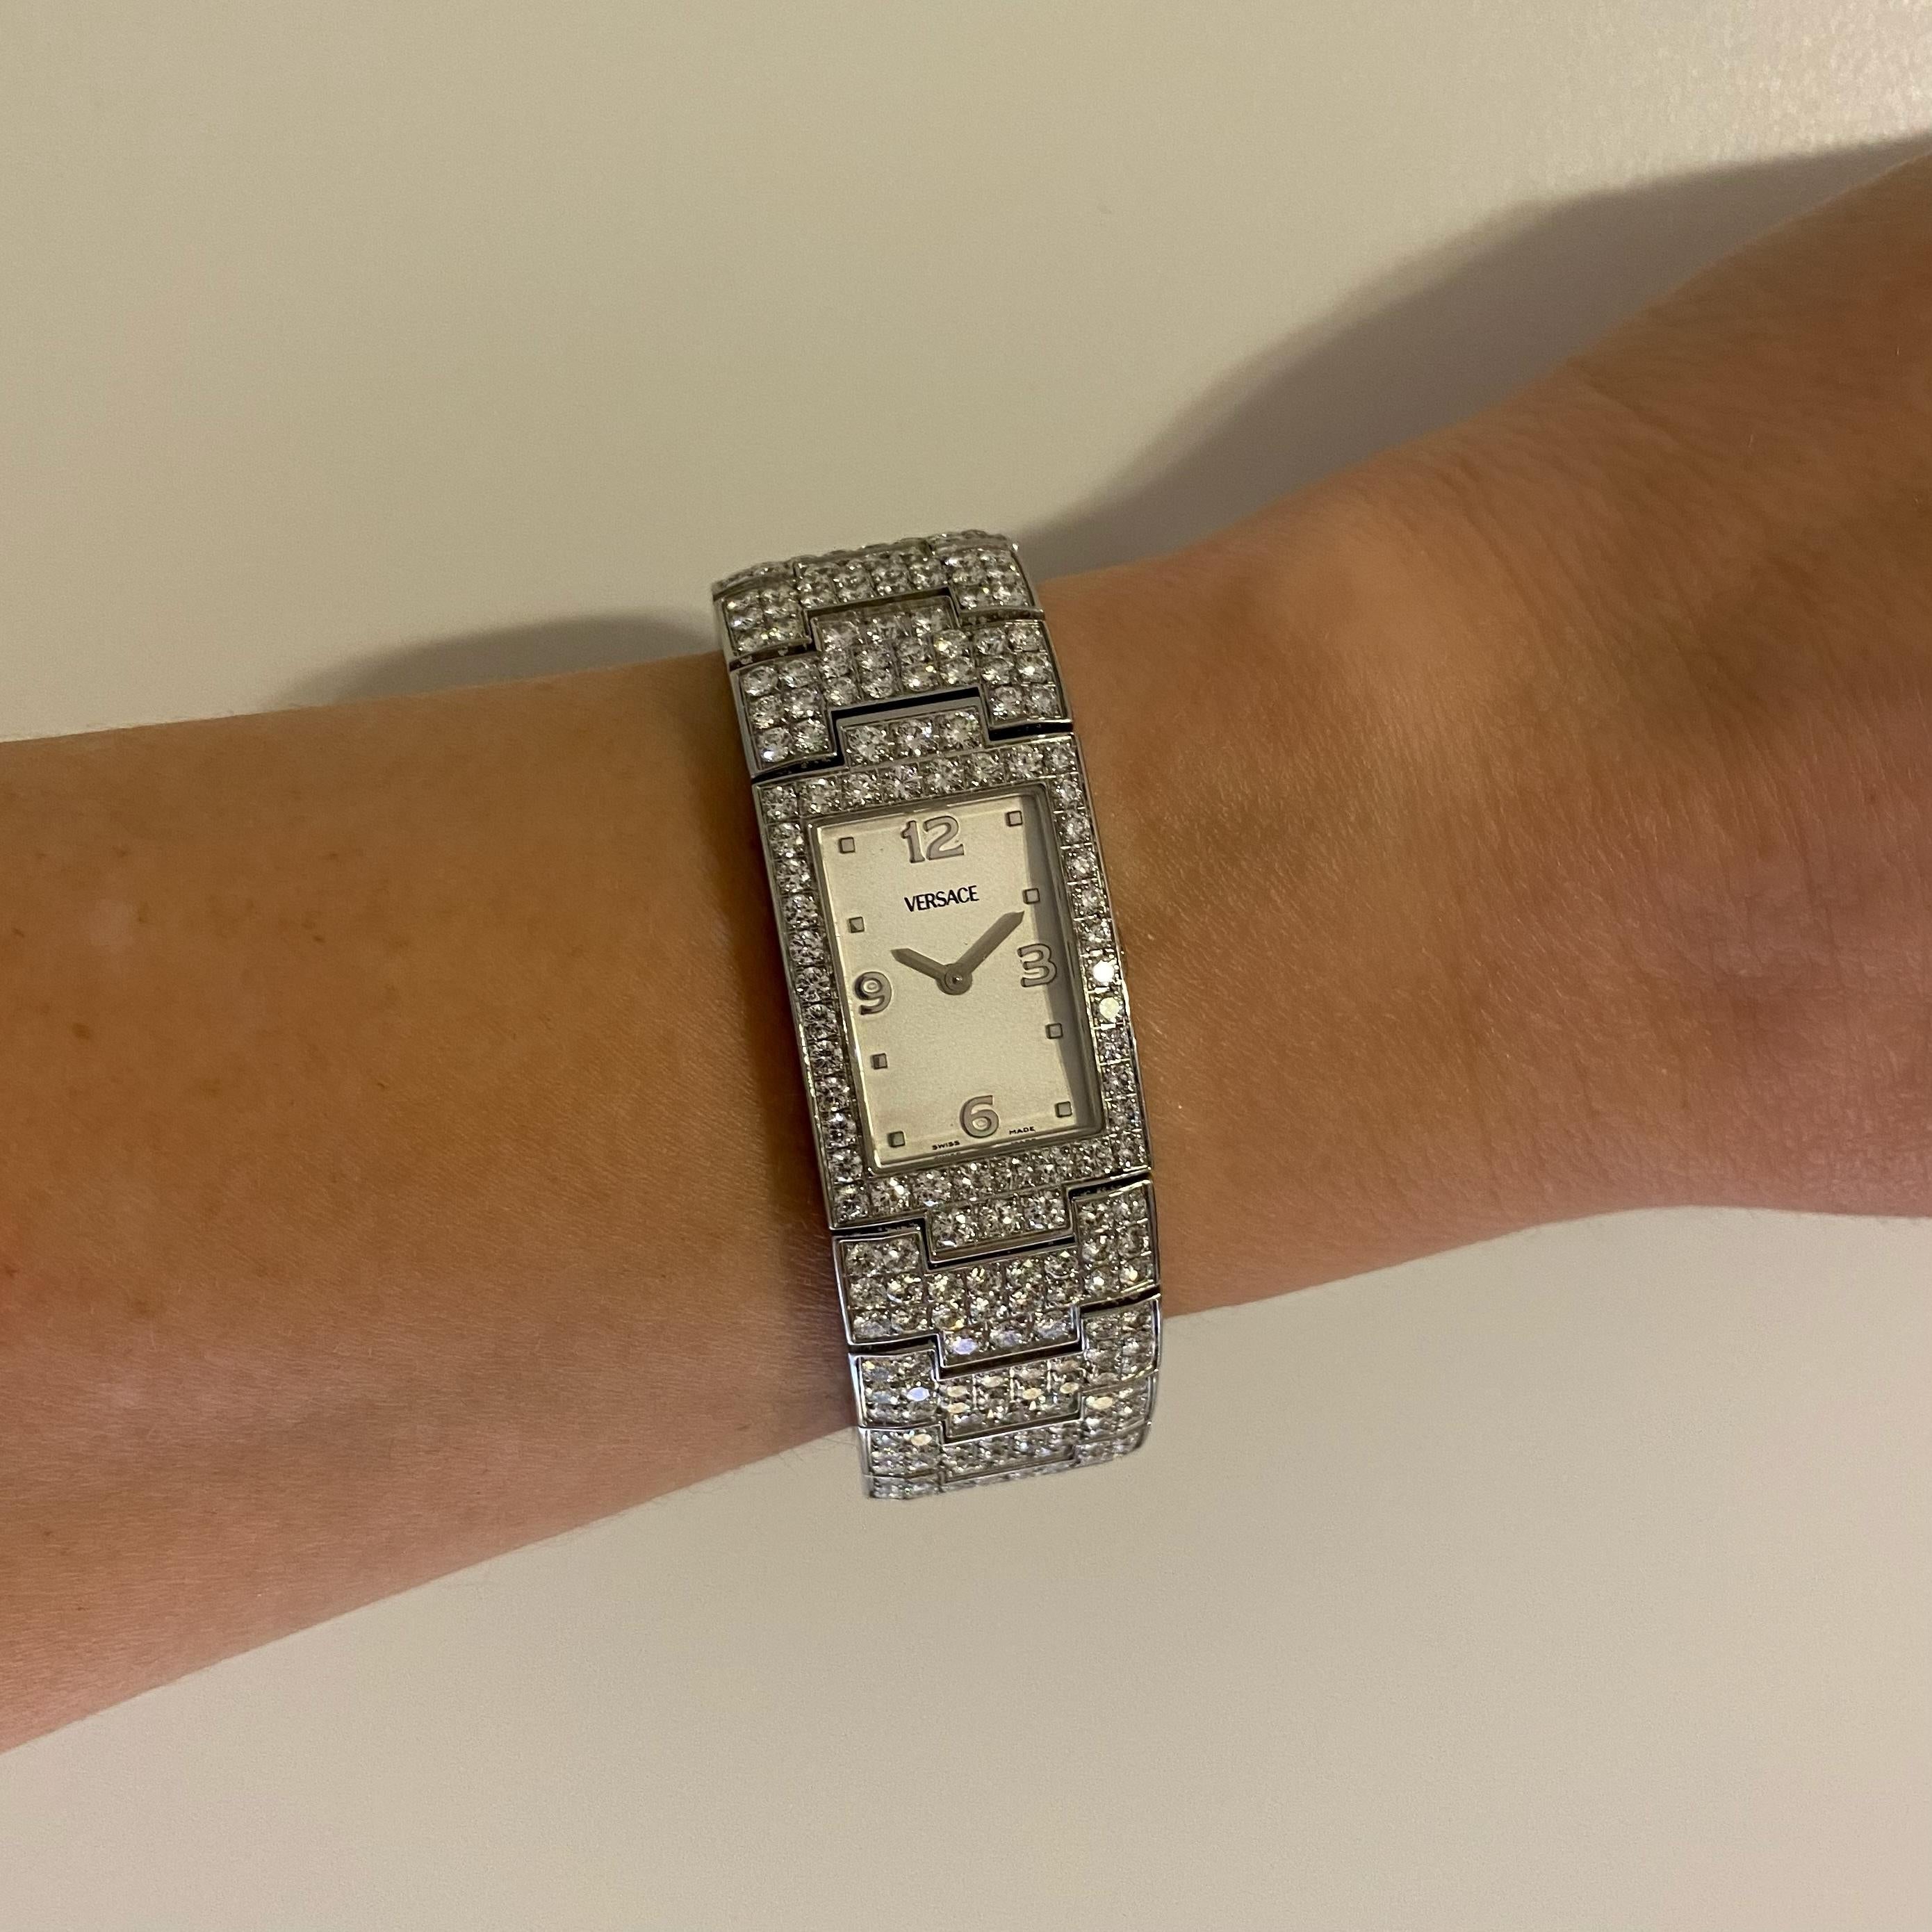 Rare Versace Greca 990139 Stainless Steel Diamond Wrist Watch. Watch and Bracelet hand set with 446 round Brilliant cut Diamonds weighing approx. 15.75tcw. Swiss Made, Quartz Movement. 30mm tall x 20mm wide. 